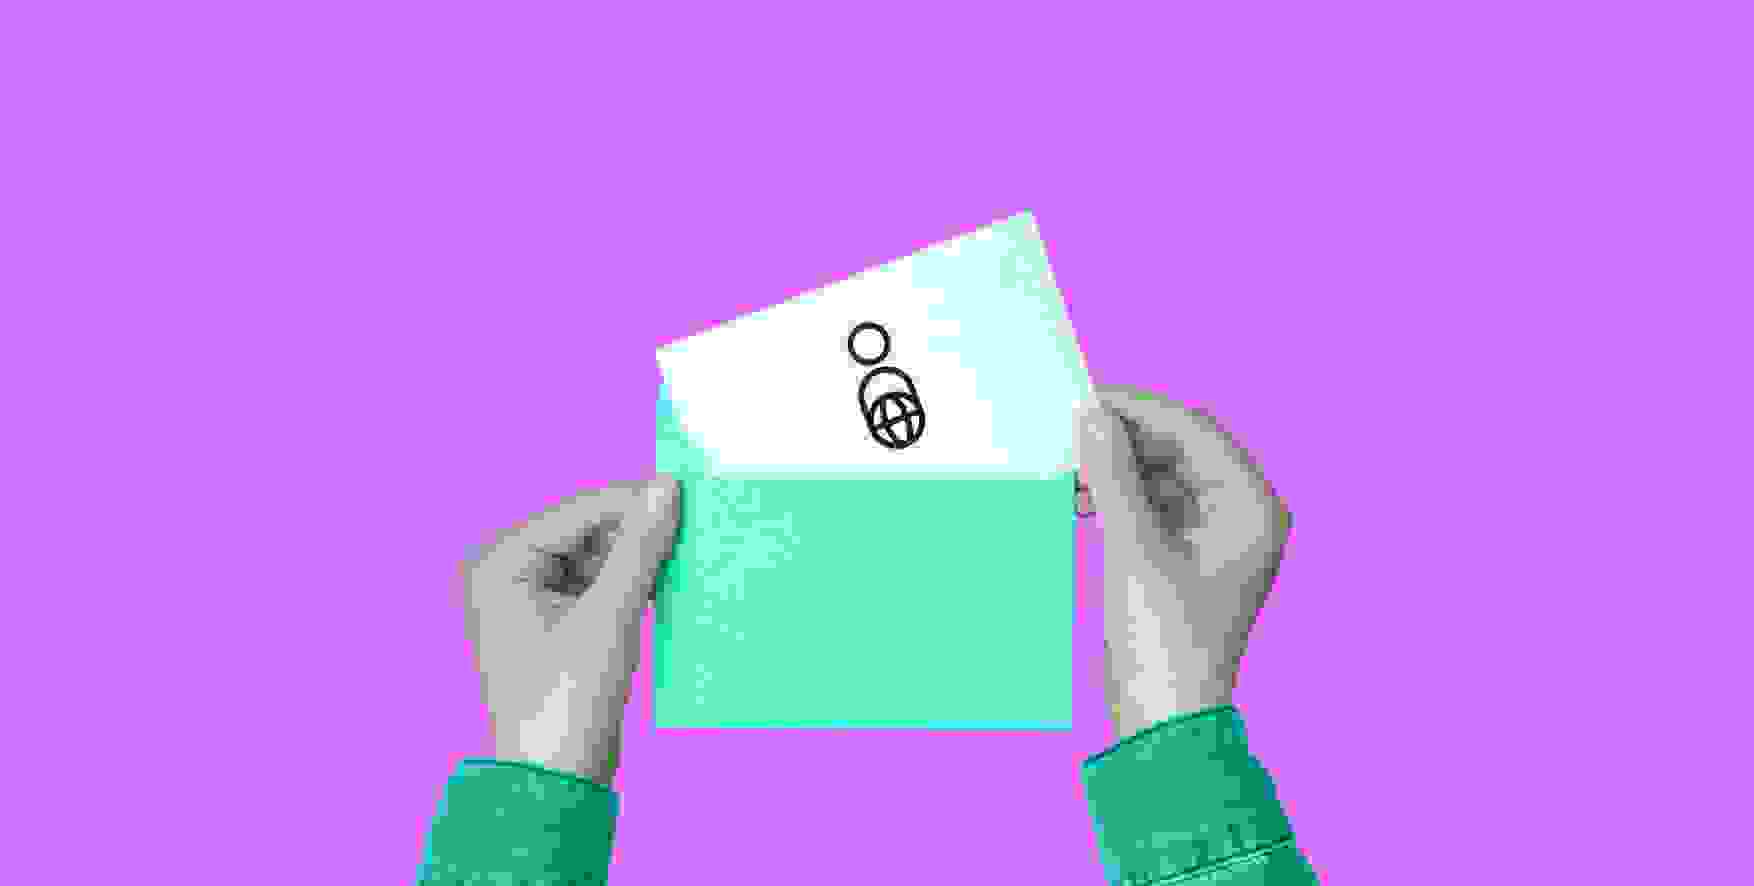 a sheet of paper with a man silhouette symbol in an envelope